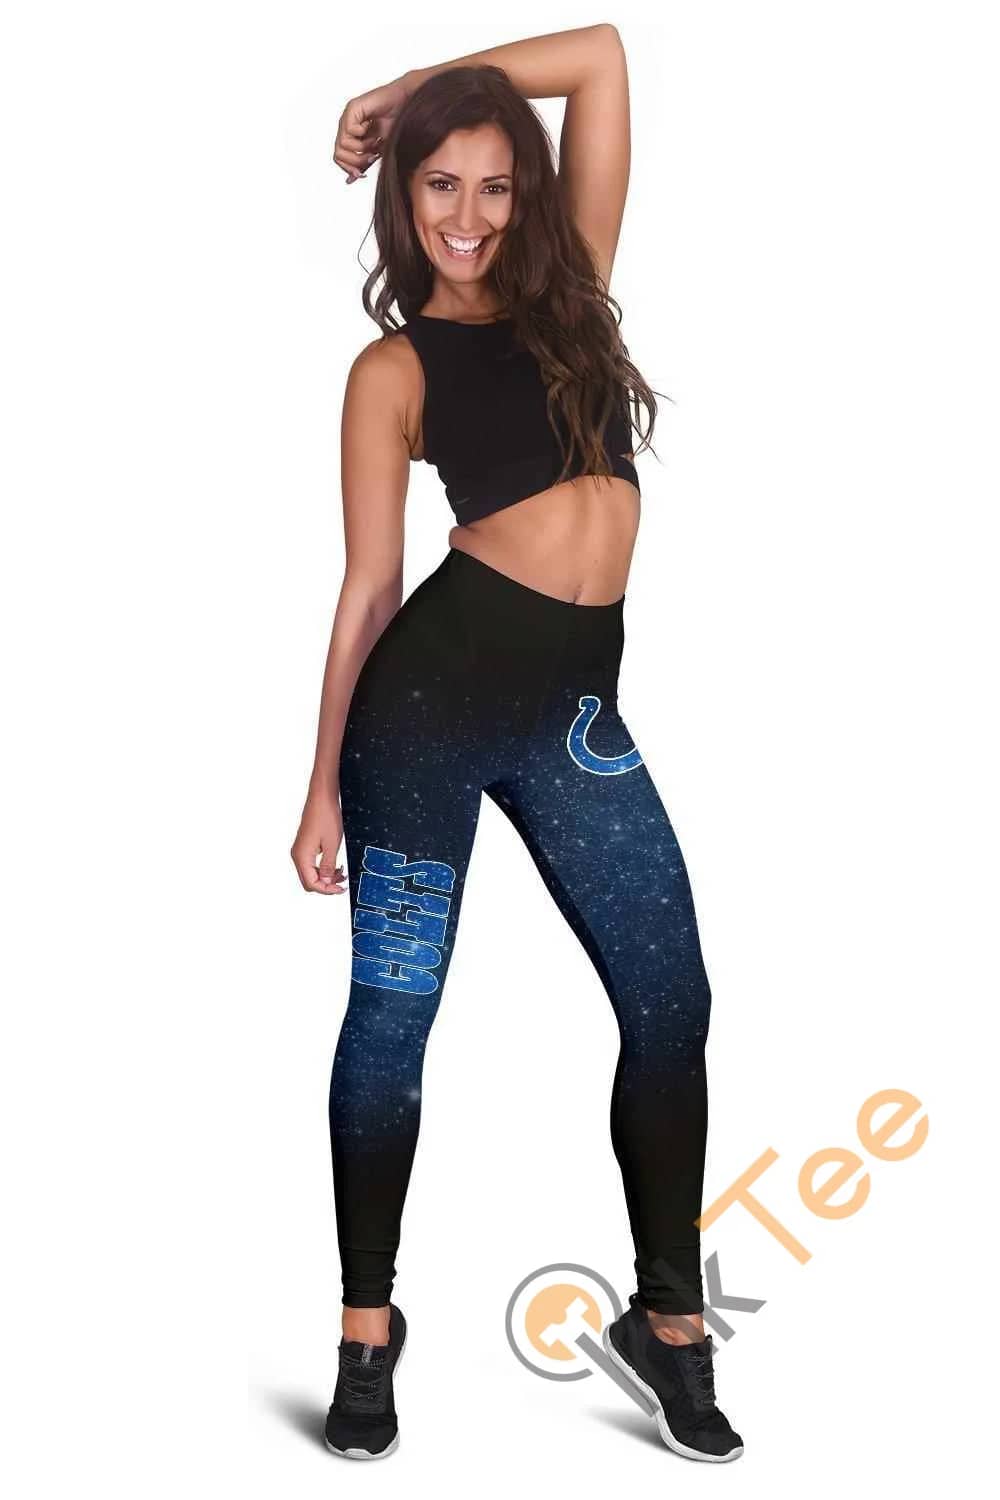 Indianapolis Colts 3D All Over Print For Yoga Fitness Women's Leggings